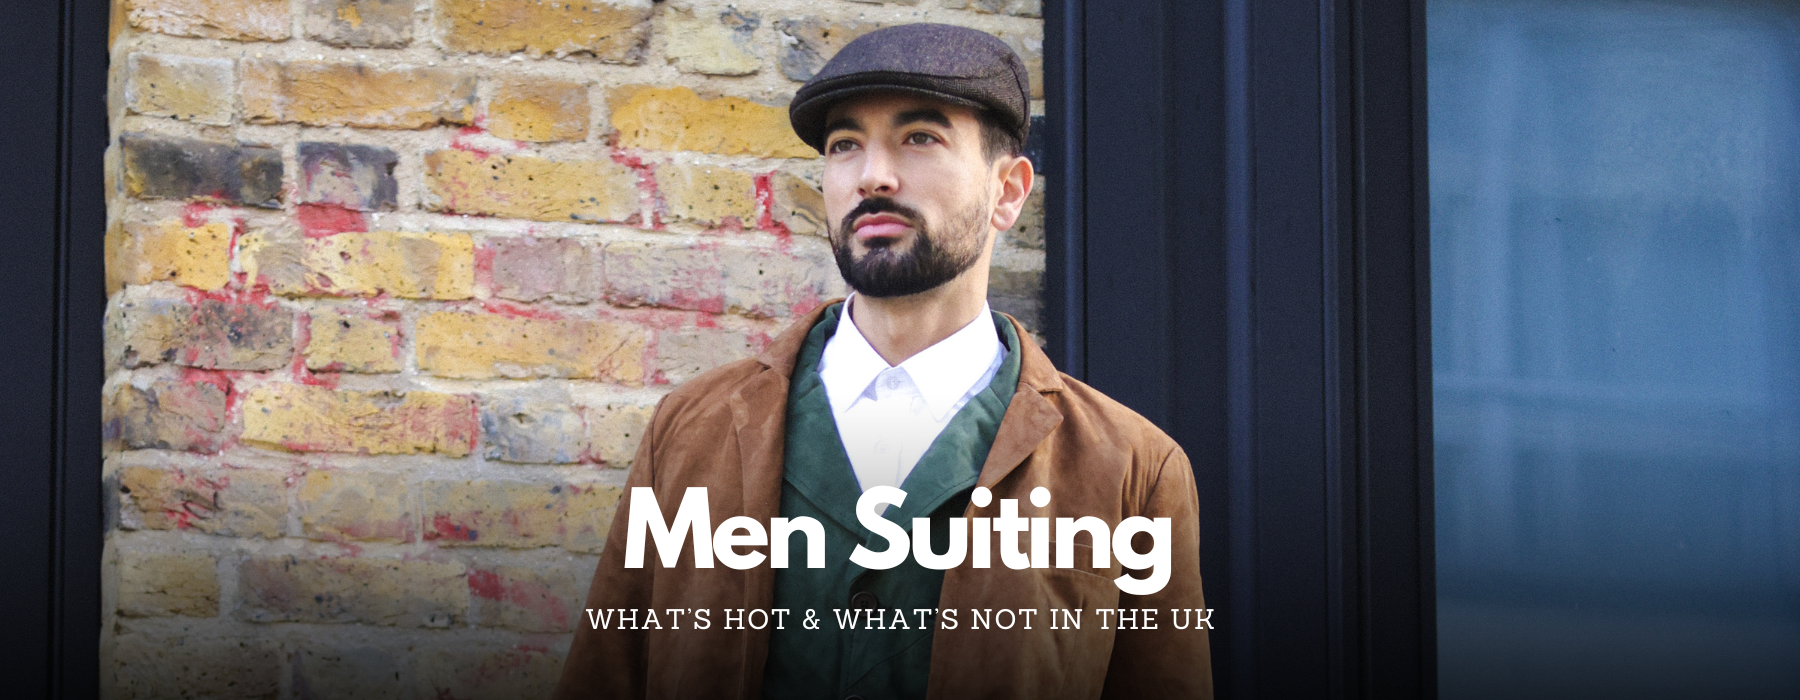 Trends in Men's Suiting: What's Hot and What's Not in the UK - Upperclass Fashions 